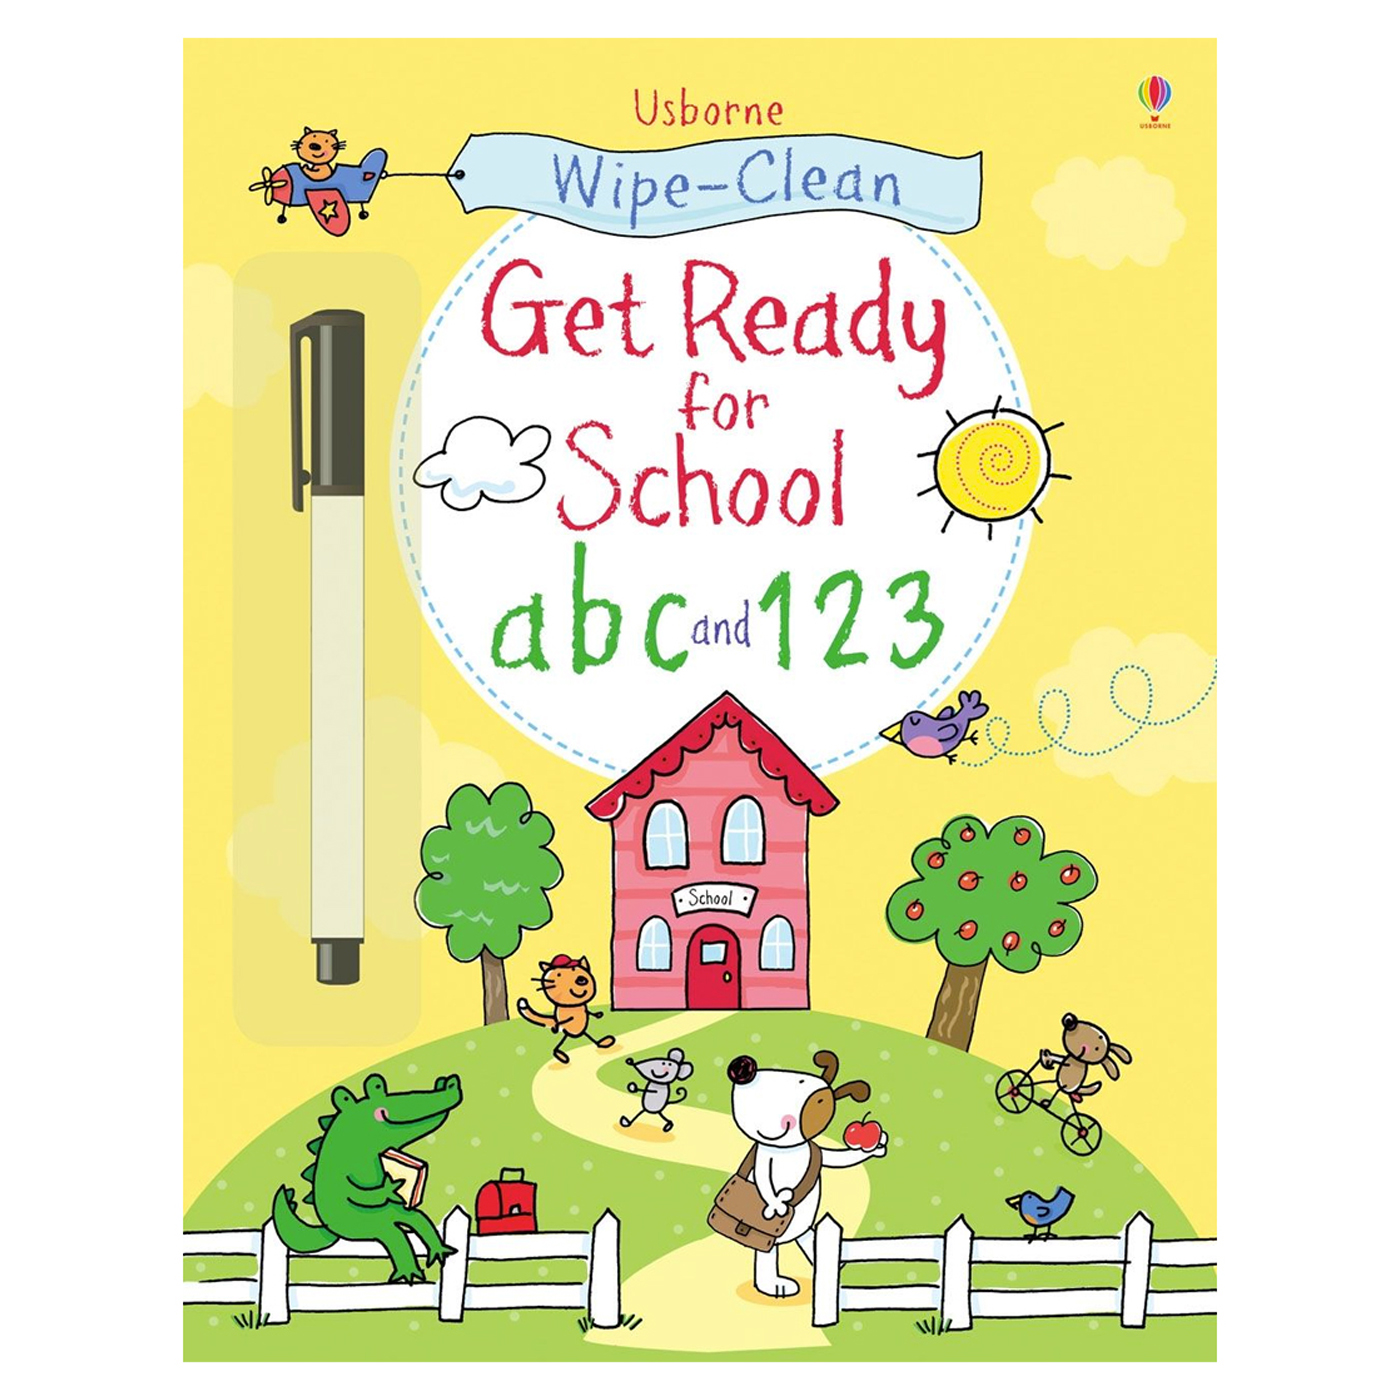  Wipe-Clean Get Ready for School abc and 123